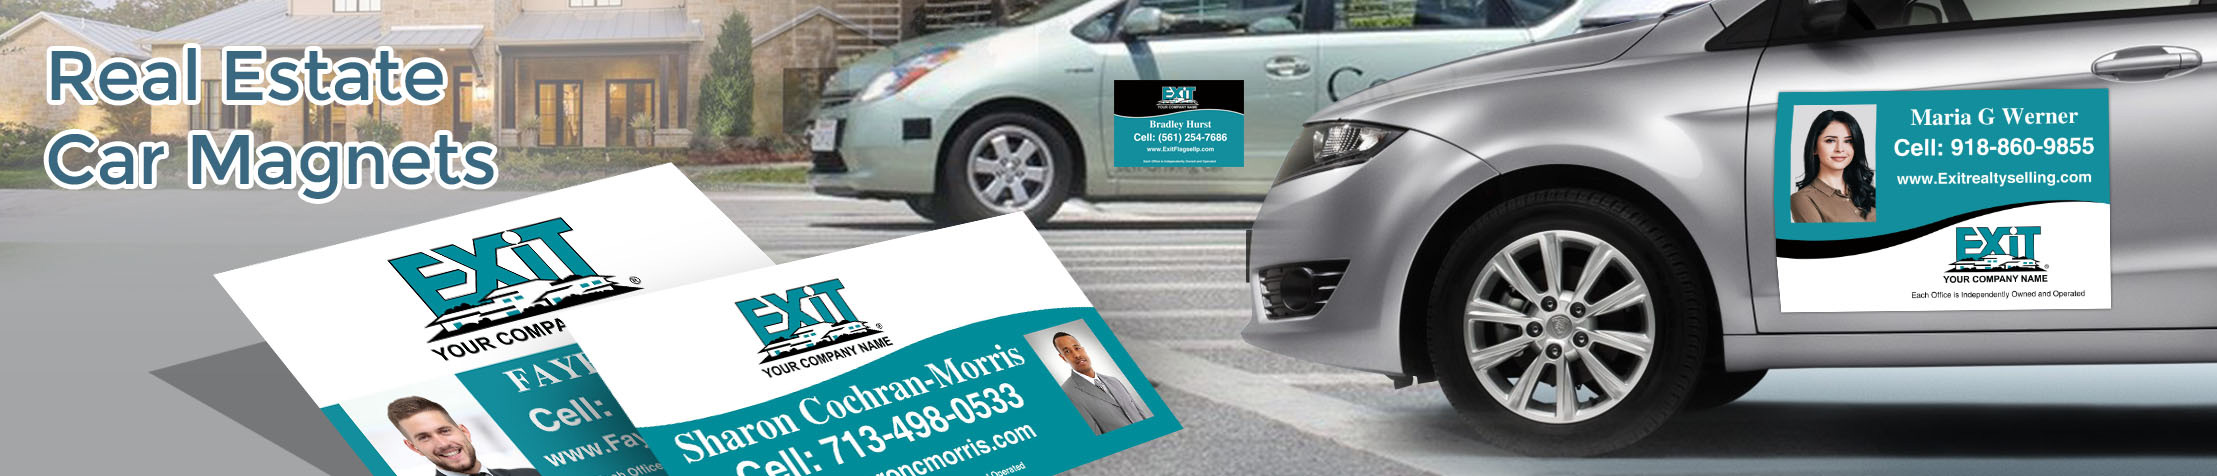 Exit Realty  Car Magnets - Exit approved vendor custom car magnets for realtors, with or without photo | BestPrintBuy.com